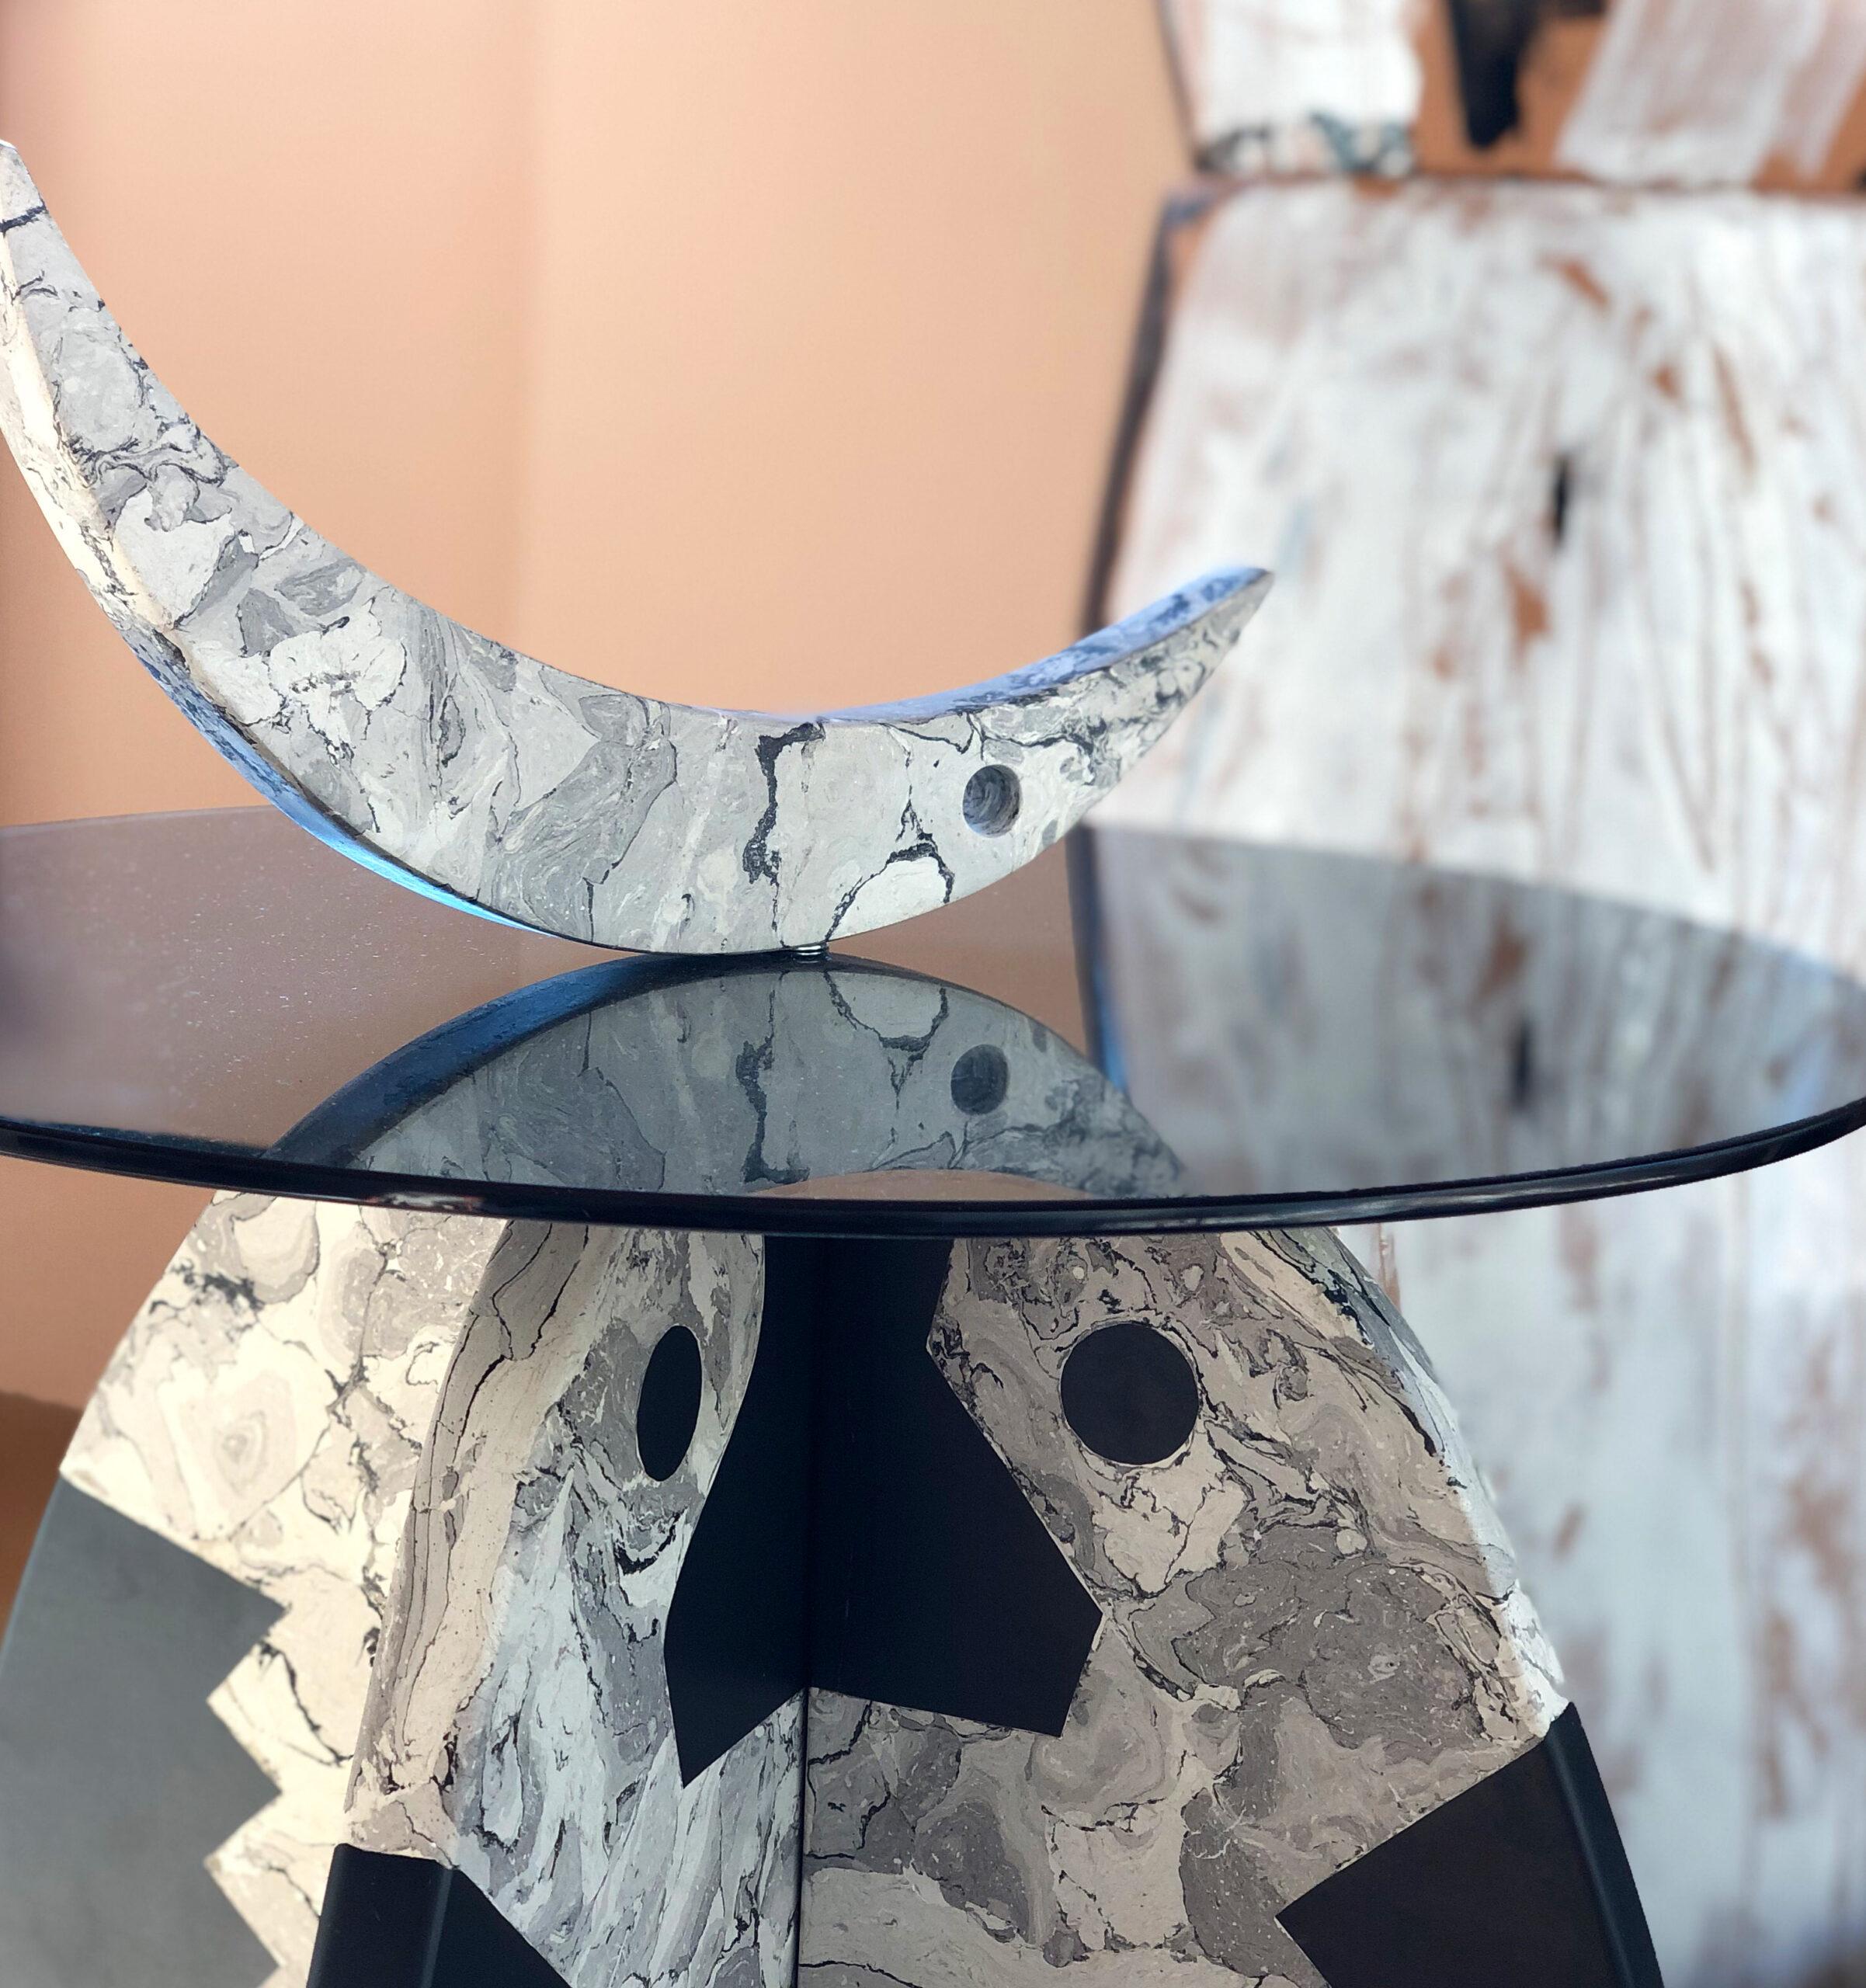 Moon side/ coffee table
Exclusively for Vgo associates
Designed by Kunaal Kyhaan
Handmade by Bianco Bianchi

For this work we have chosen a common thread between the material and the story it wants to tell. In fact, the Scagliola which is the